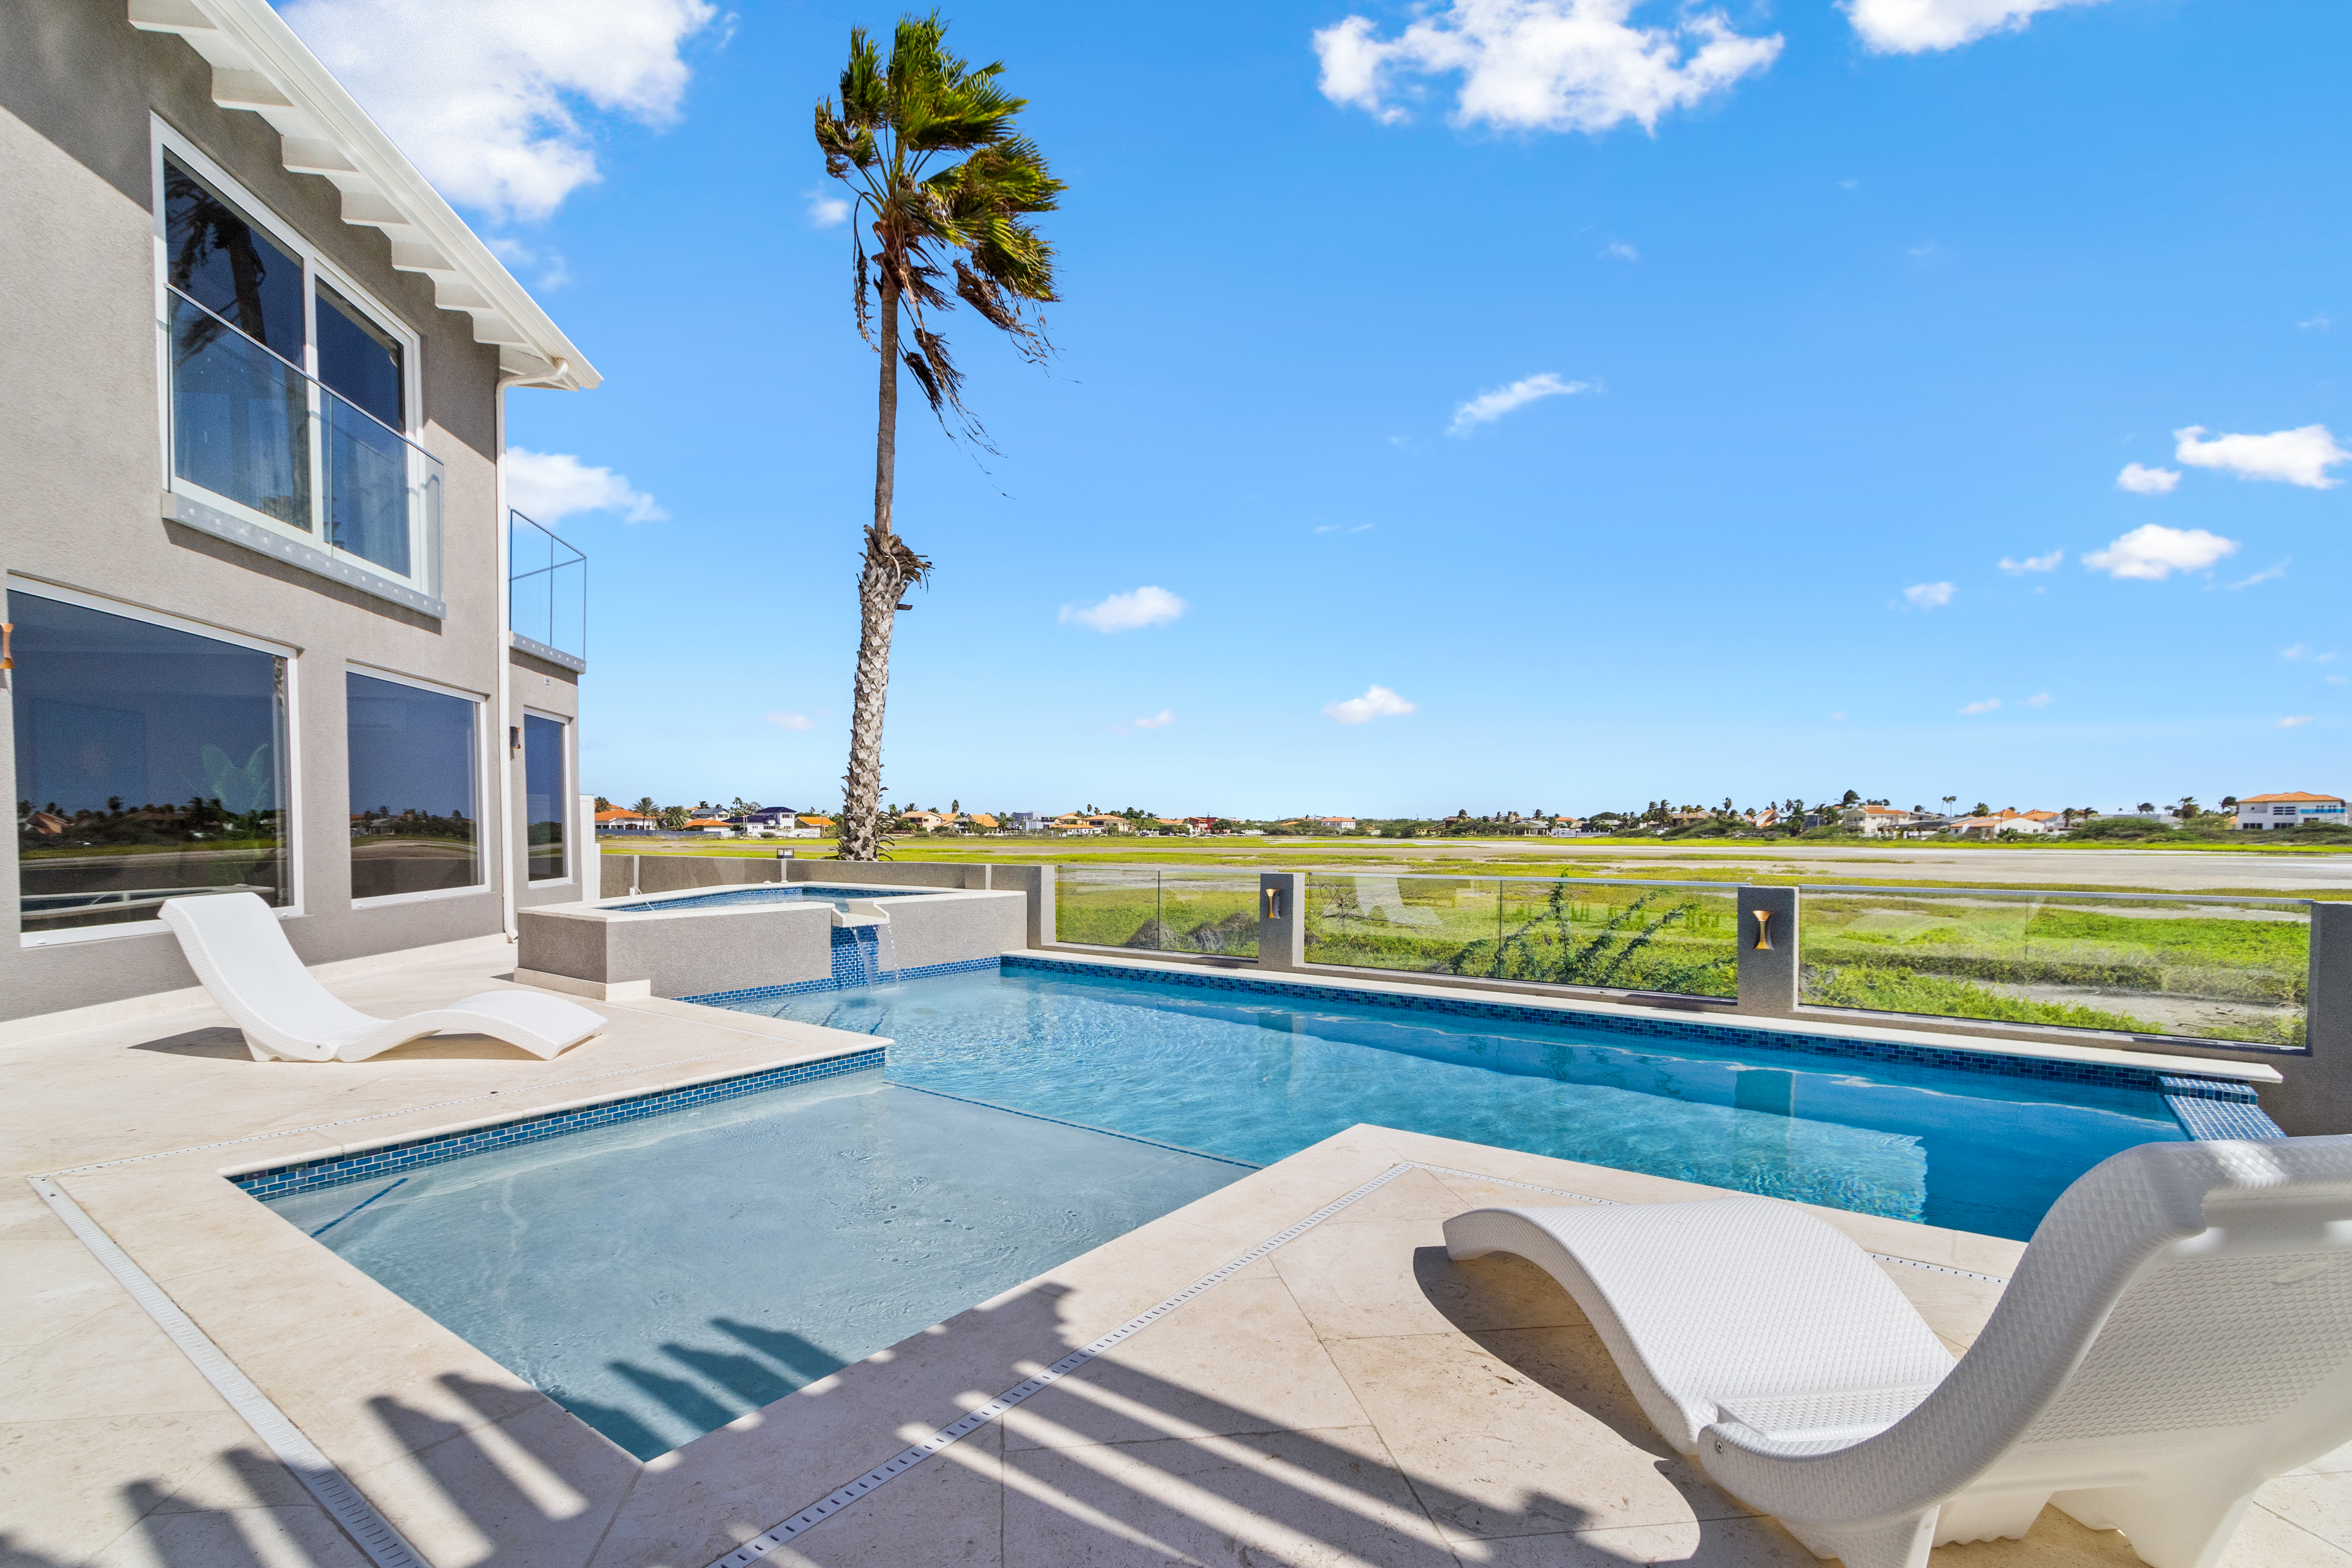 Stunning pool with gorgeous Saliña views in Noord Aruba - Provides a relaxed atmosphere for unwinding - Poolside chairs perfect for sunbathing and relaxation - Palm trees and tropical plants enhance the vacation feel